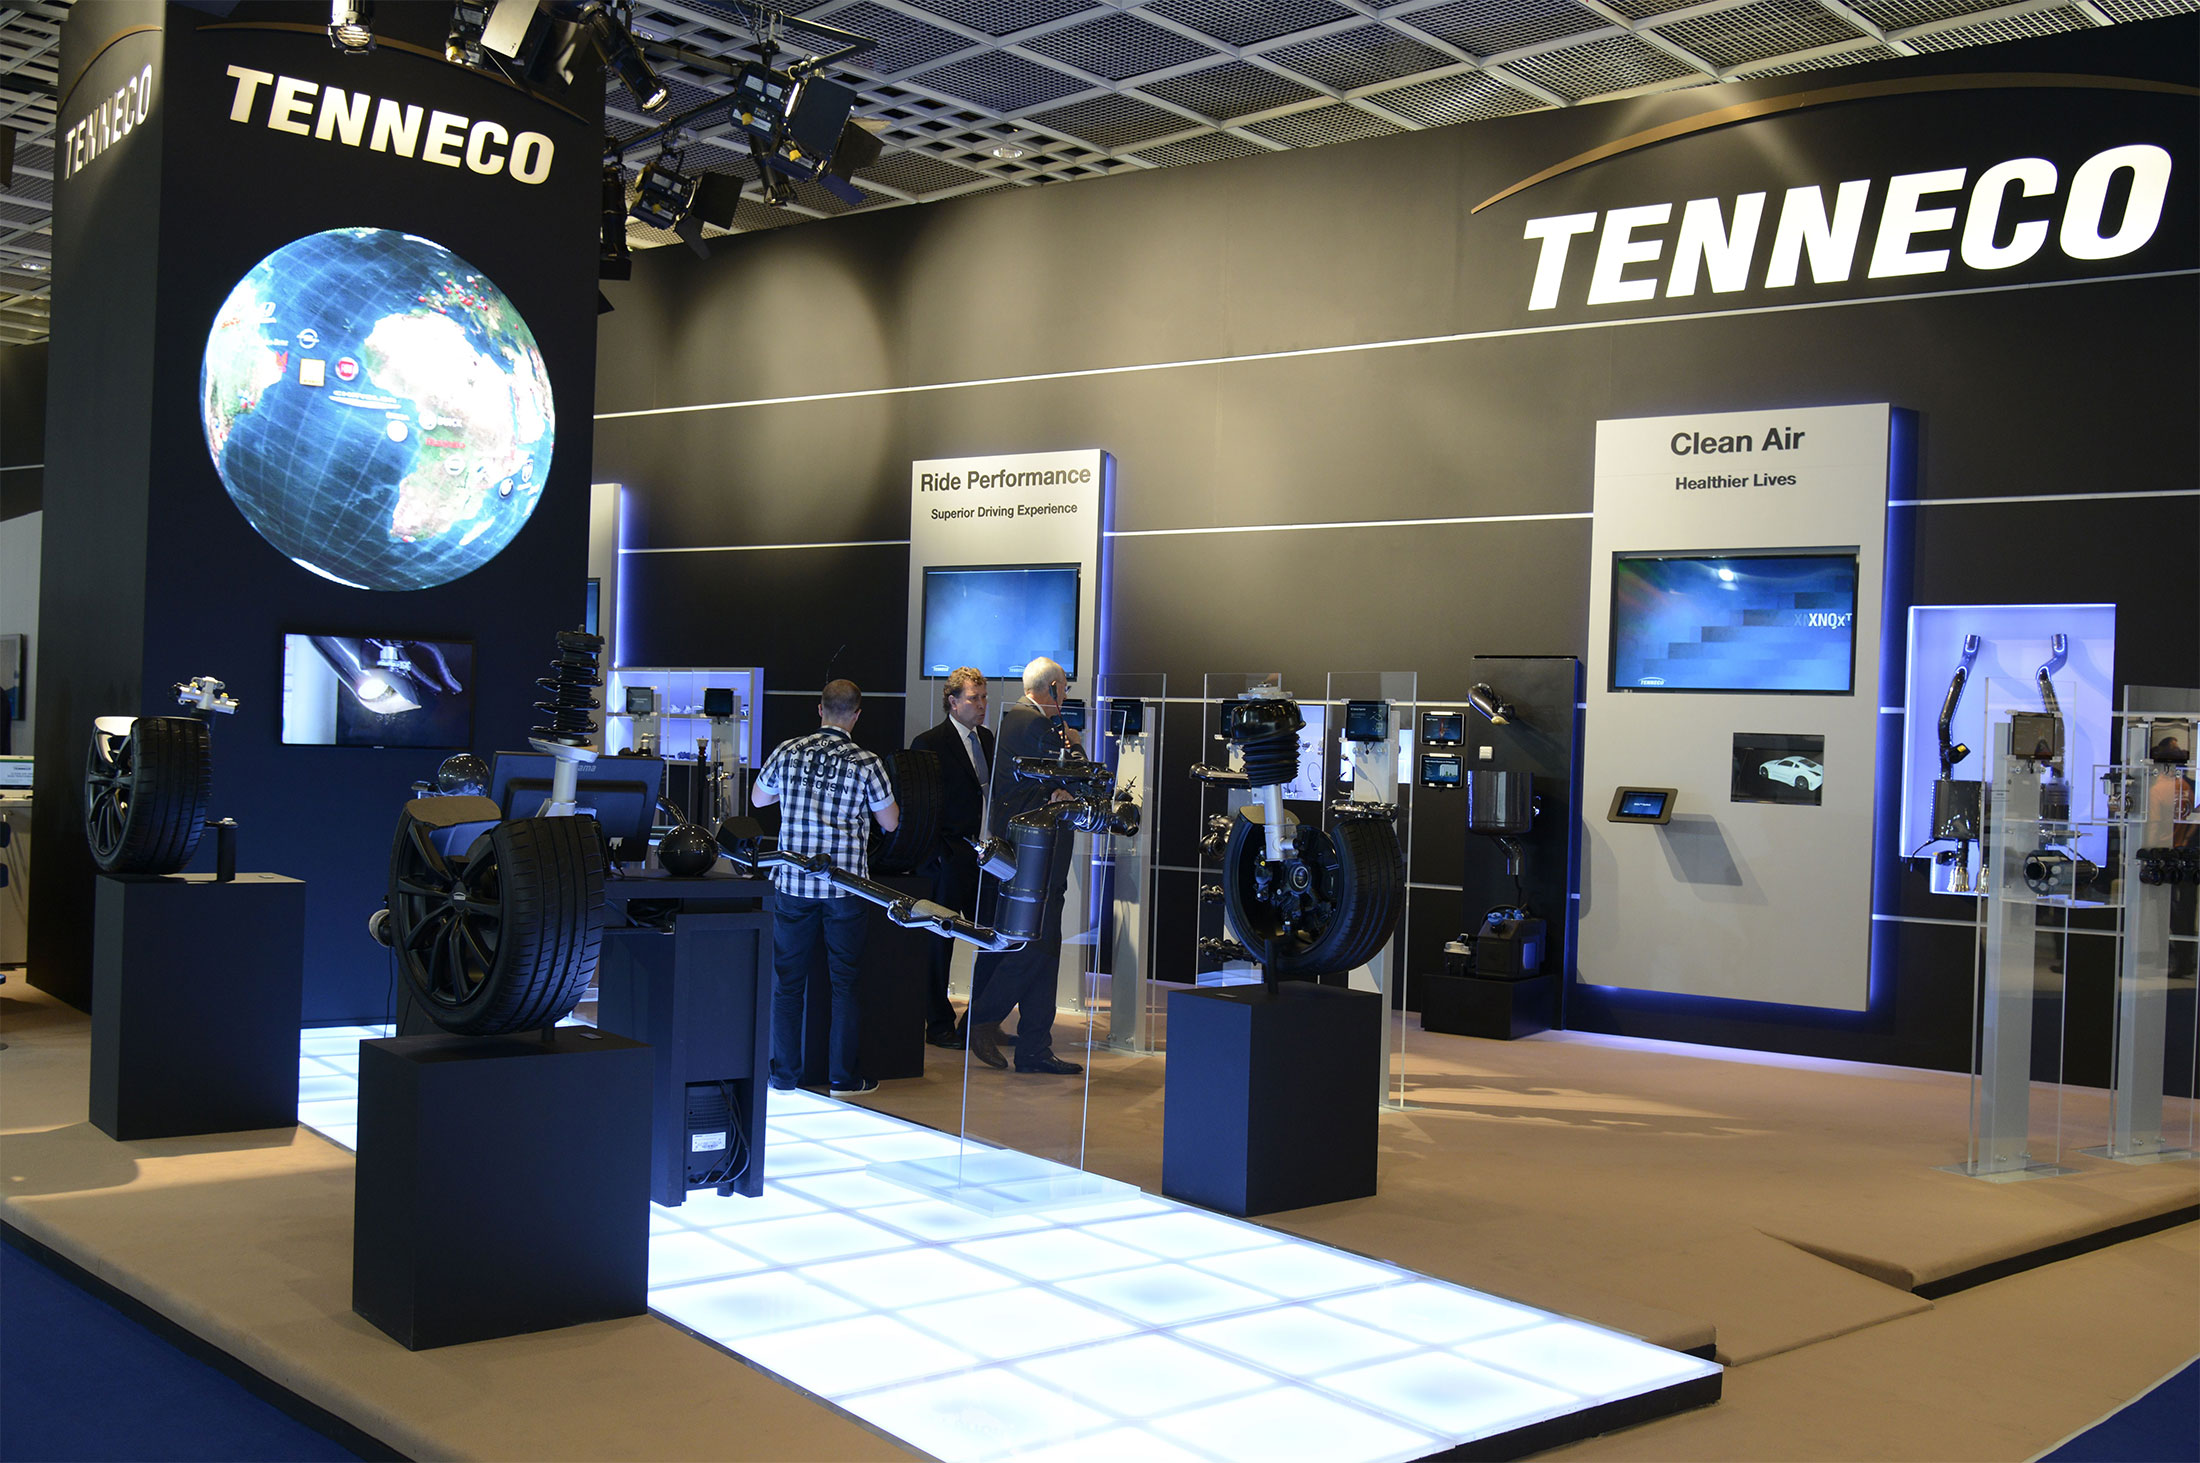 Tenneco - Cleaner, More Efficient and Reliable Performance